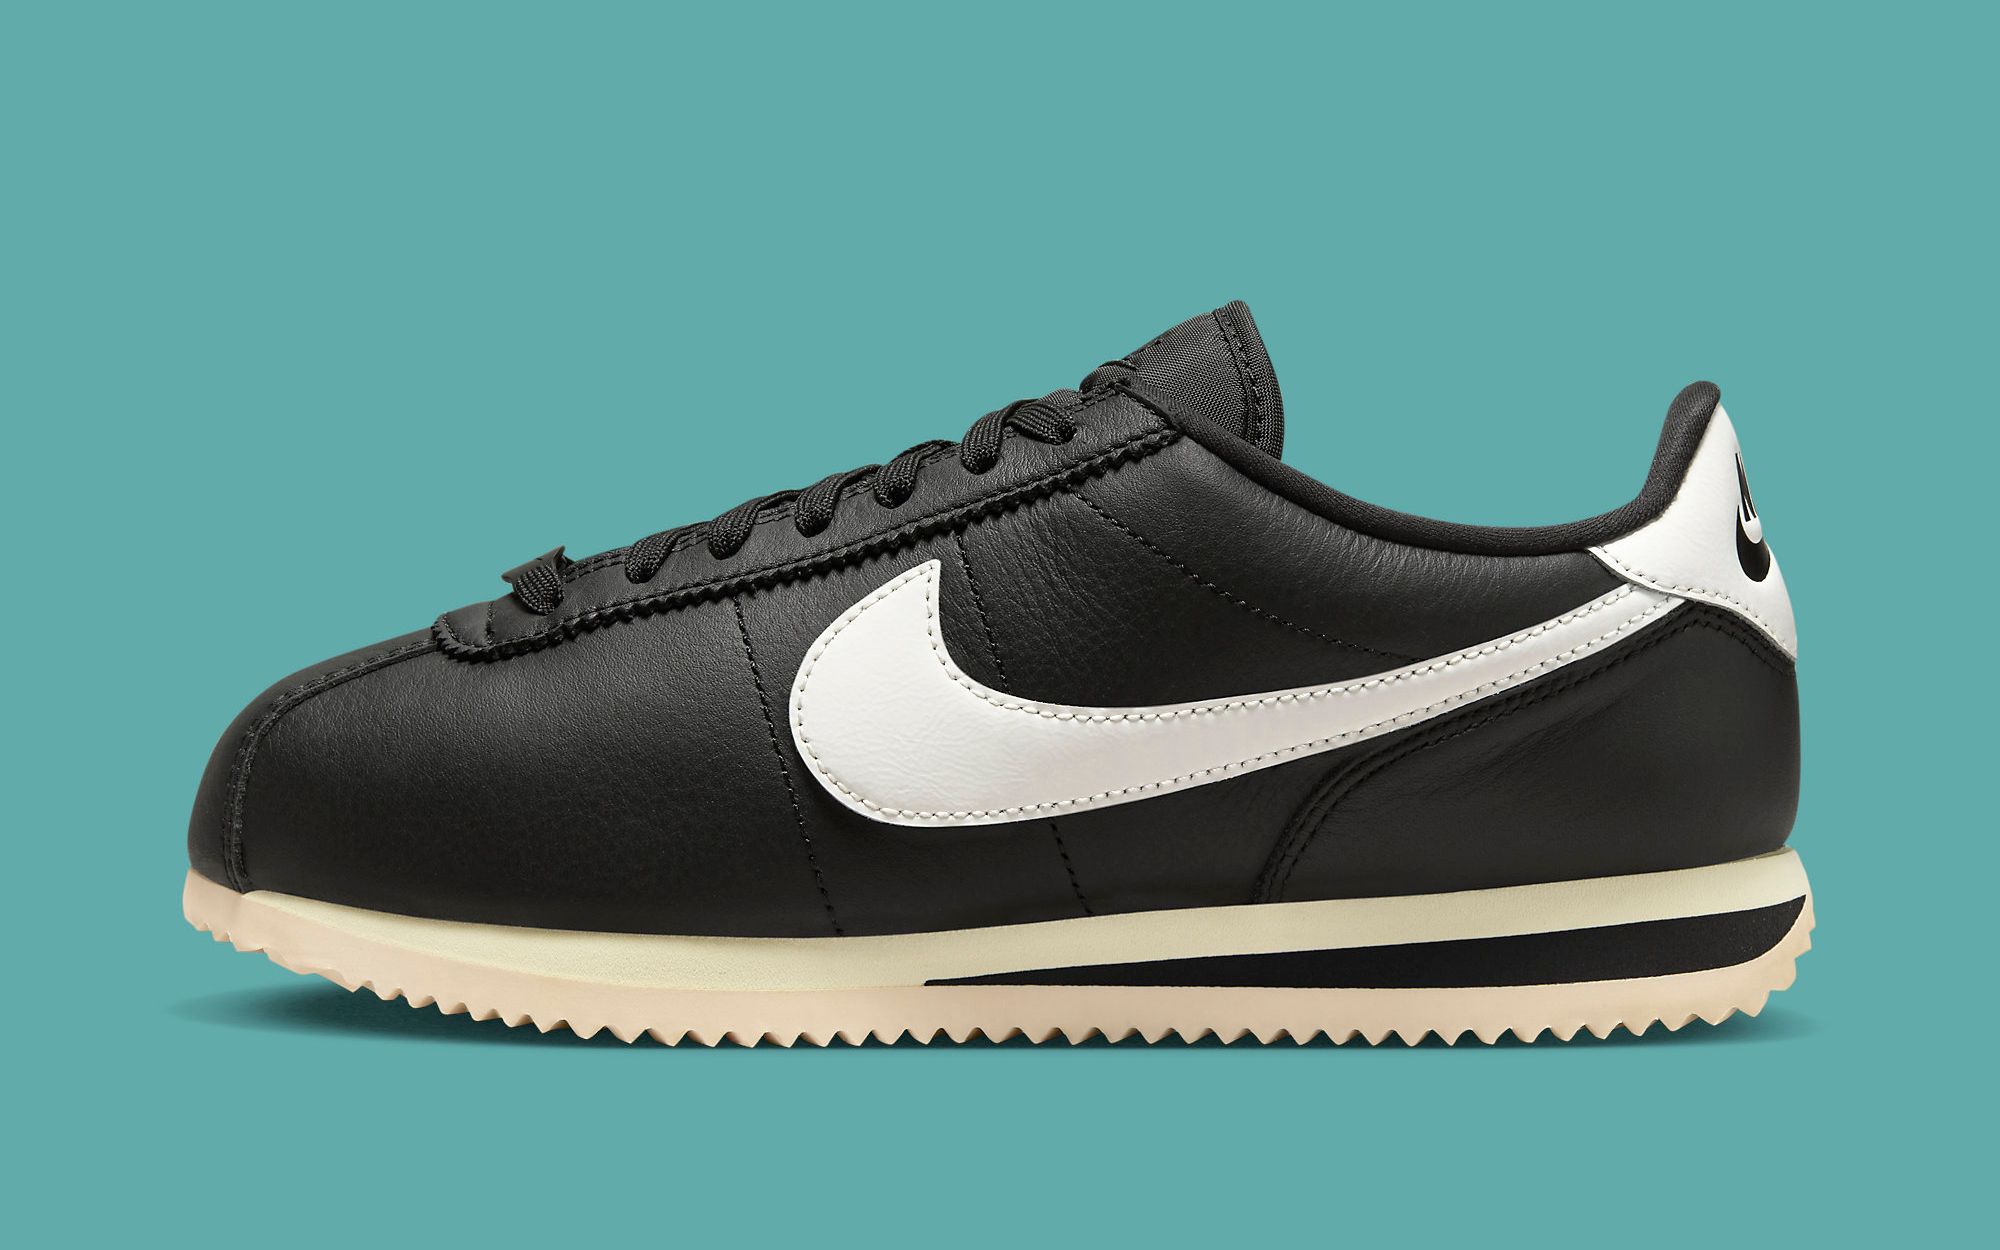 The Nike Cortez Gets a Premium Makeover in Black and Sail | House